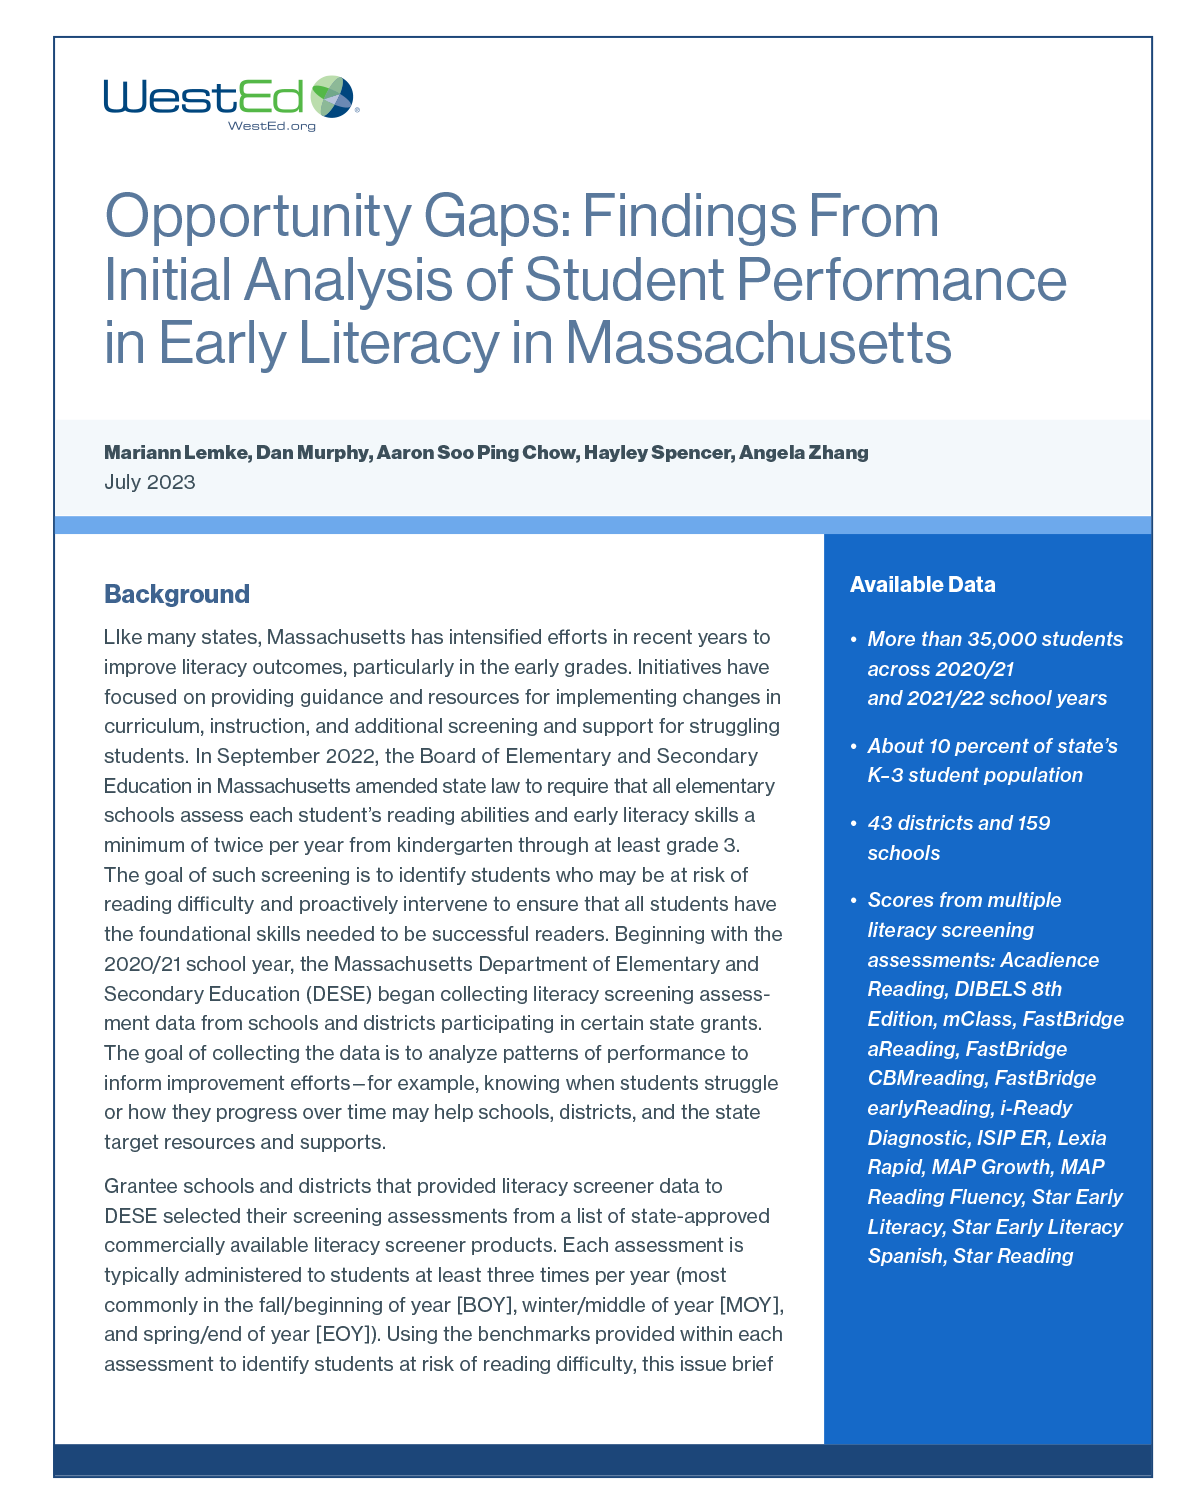 Opportunity Gaps: Findings From Initial Analysis of Student Performance in Early Literacy in Massachusetts